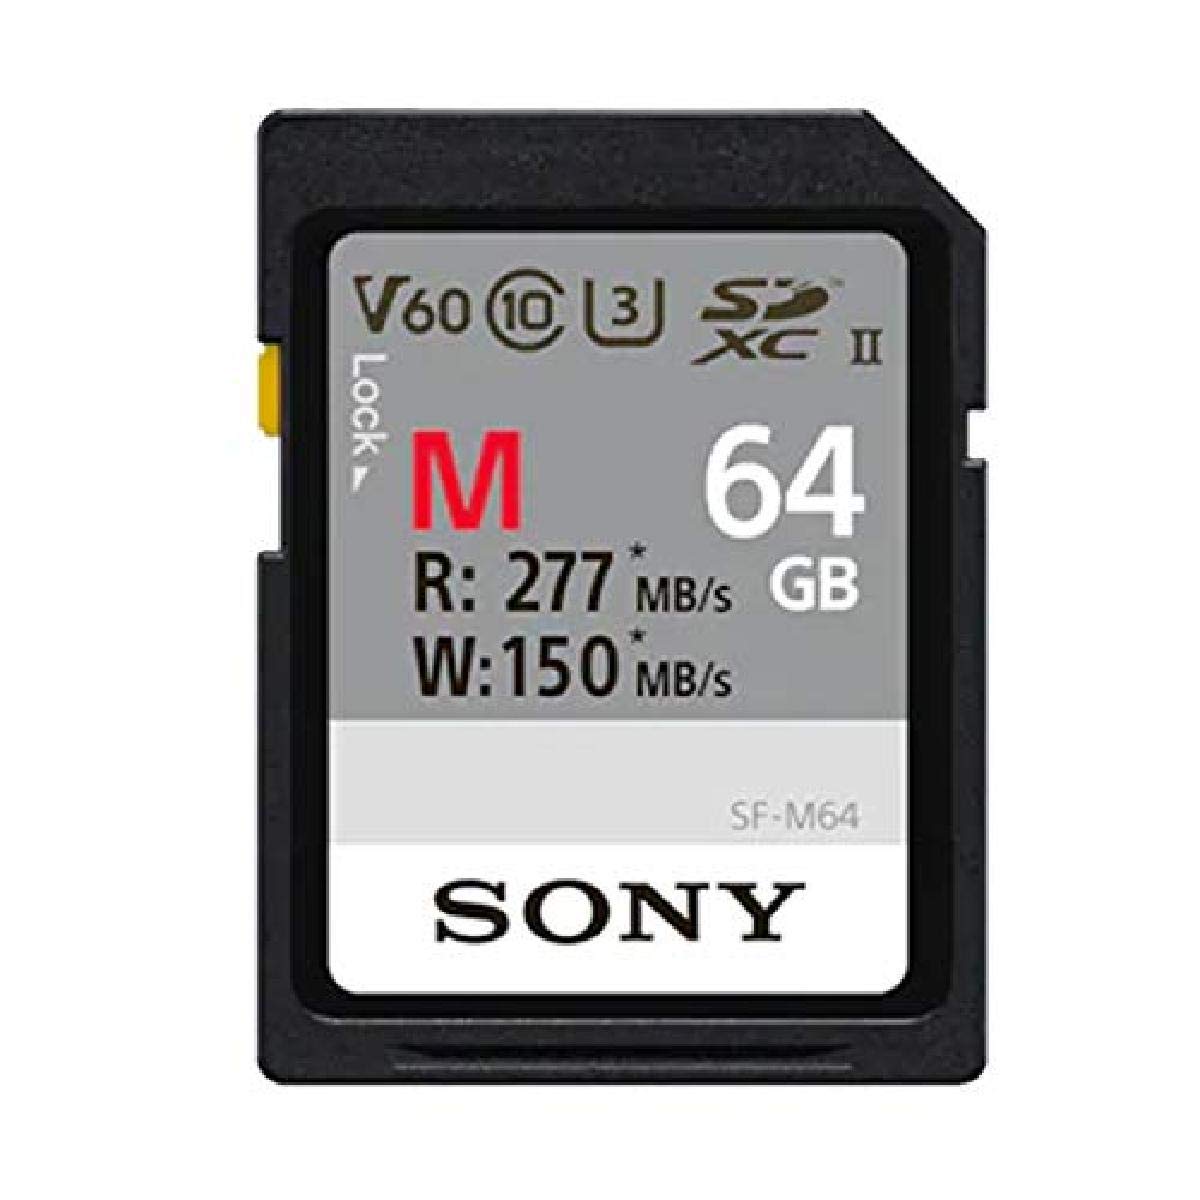 Book Cover Sony M Series SDXC UHS-II Card 64GB, V60, CL10, U3, Max R277MB/S, W150MB/S (SF-M64/T2), Black Memory Card